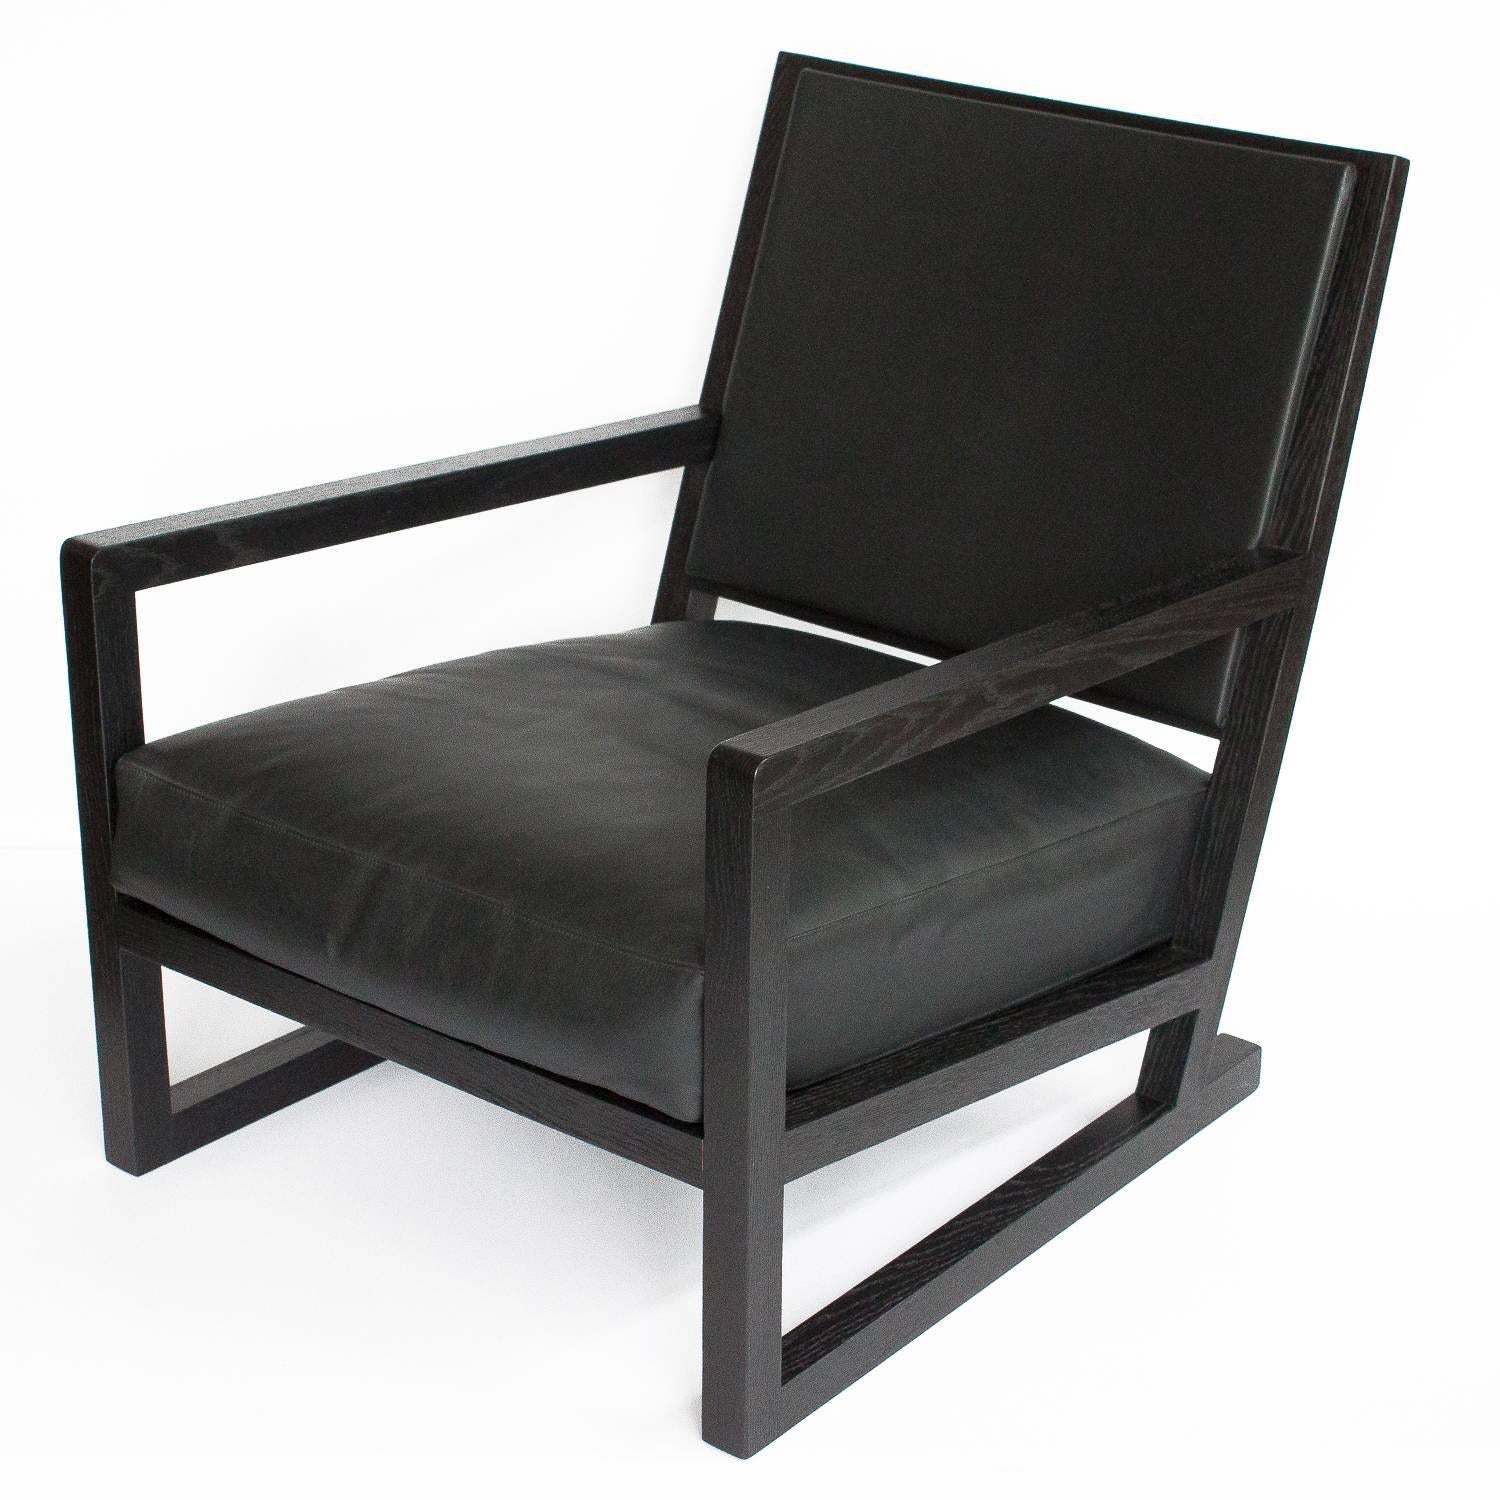 Clio armchair by Antonio Citterio for B&B Italia / Maxalto. From the Simplice collection, 2005 production year. Solid oak frame with a brushed black ebonized finish. The seat and back are upholstered in a charcoal leather. The loose back pillow